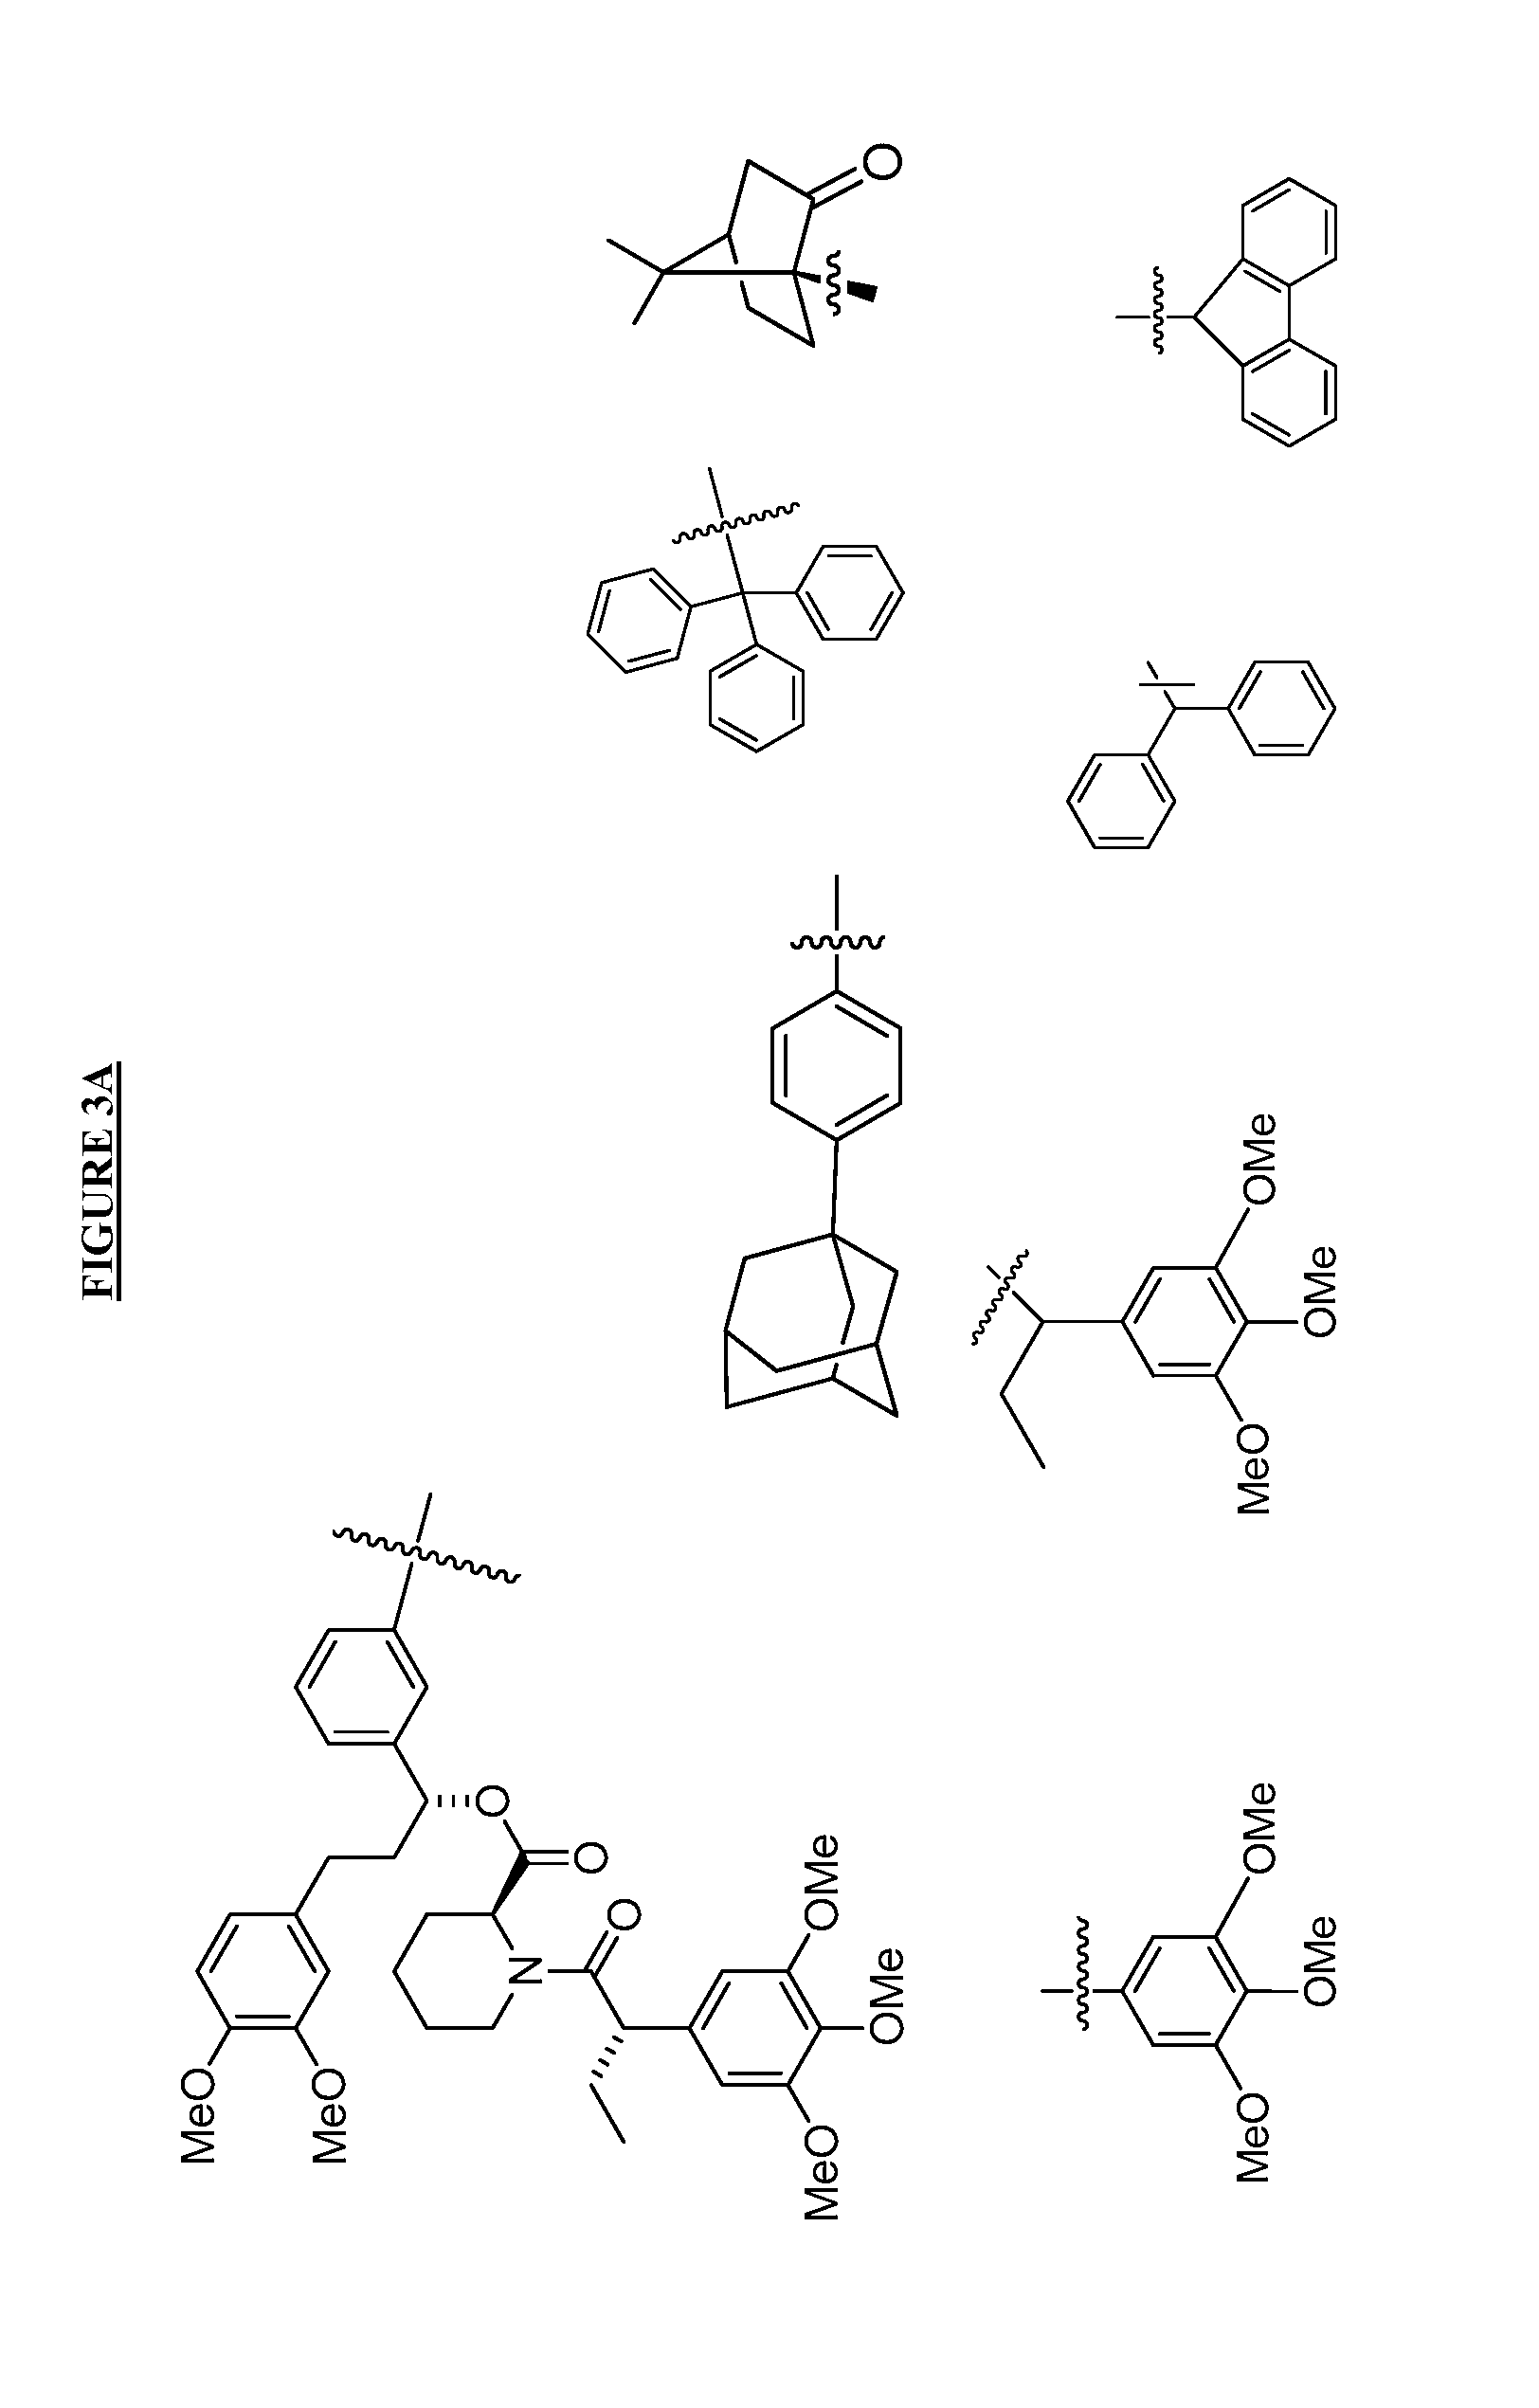 Compounds useful for promoting protein degradation and methods using same